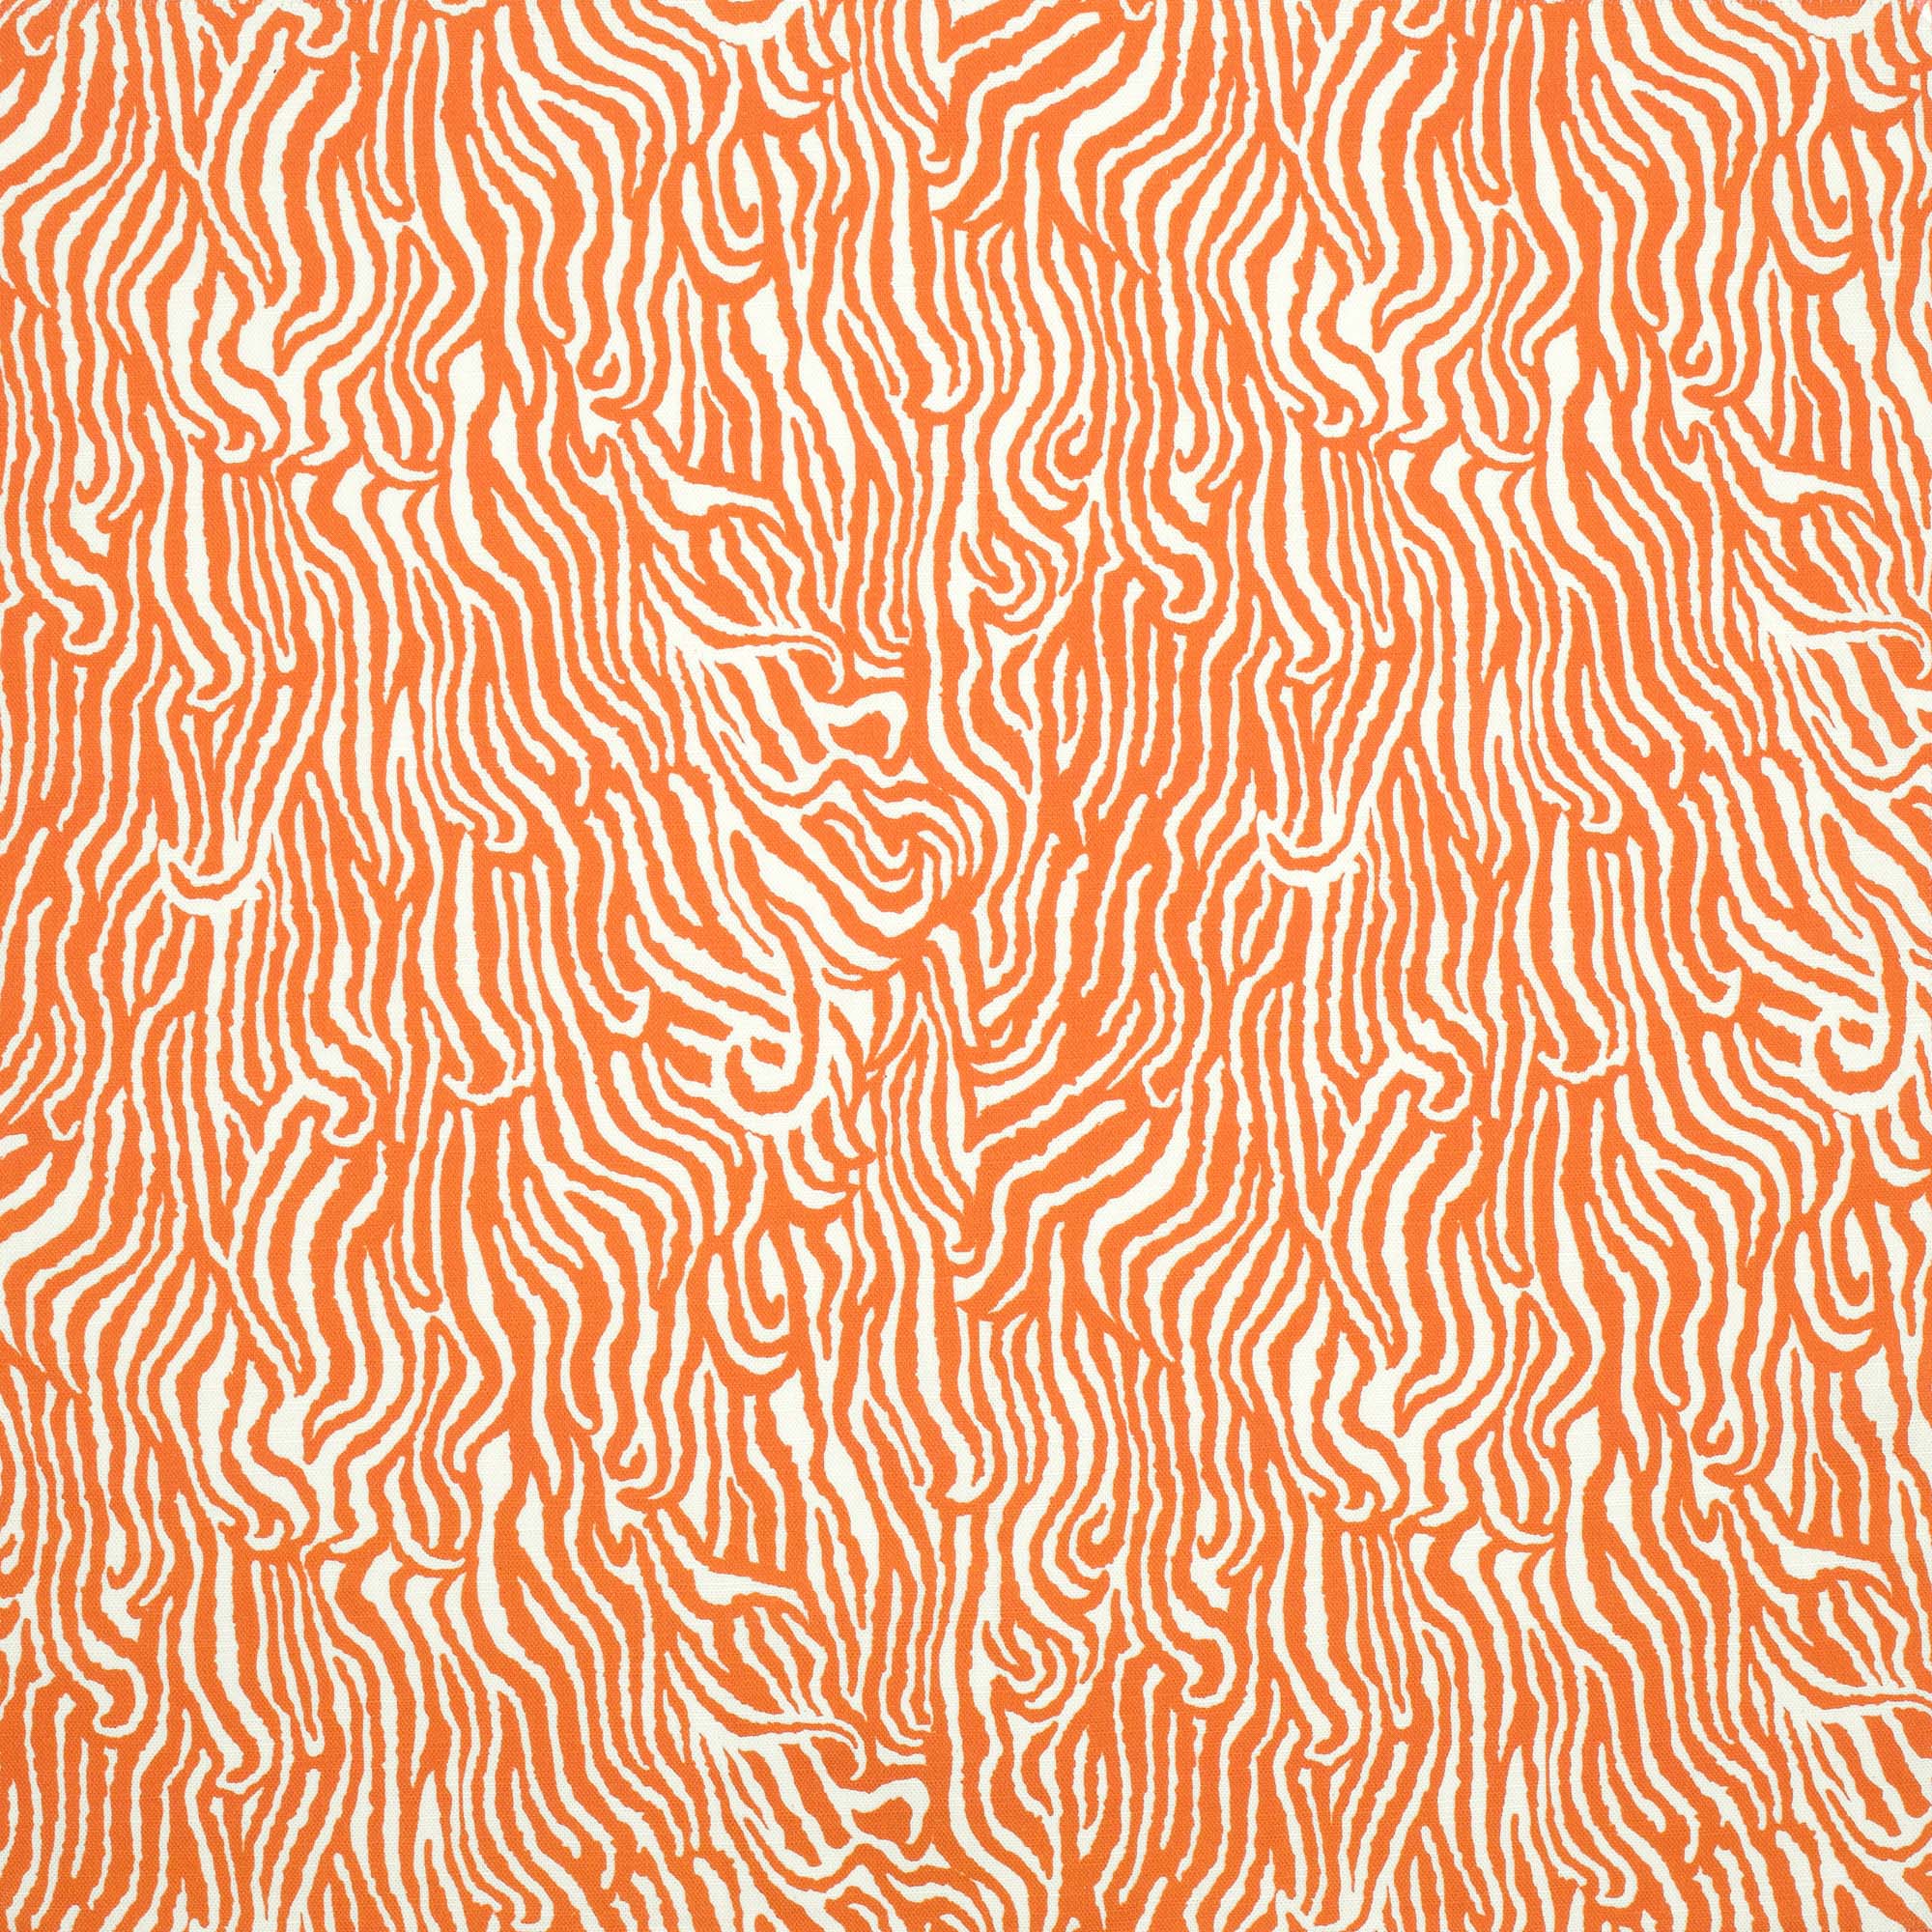 Detail of fabric in a playful animal print in orange on a white field.